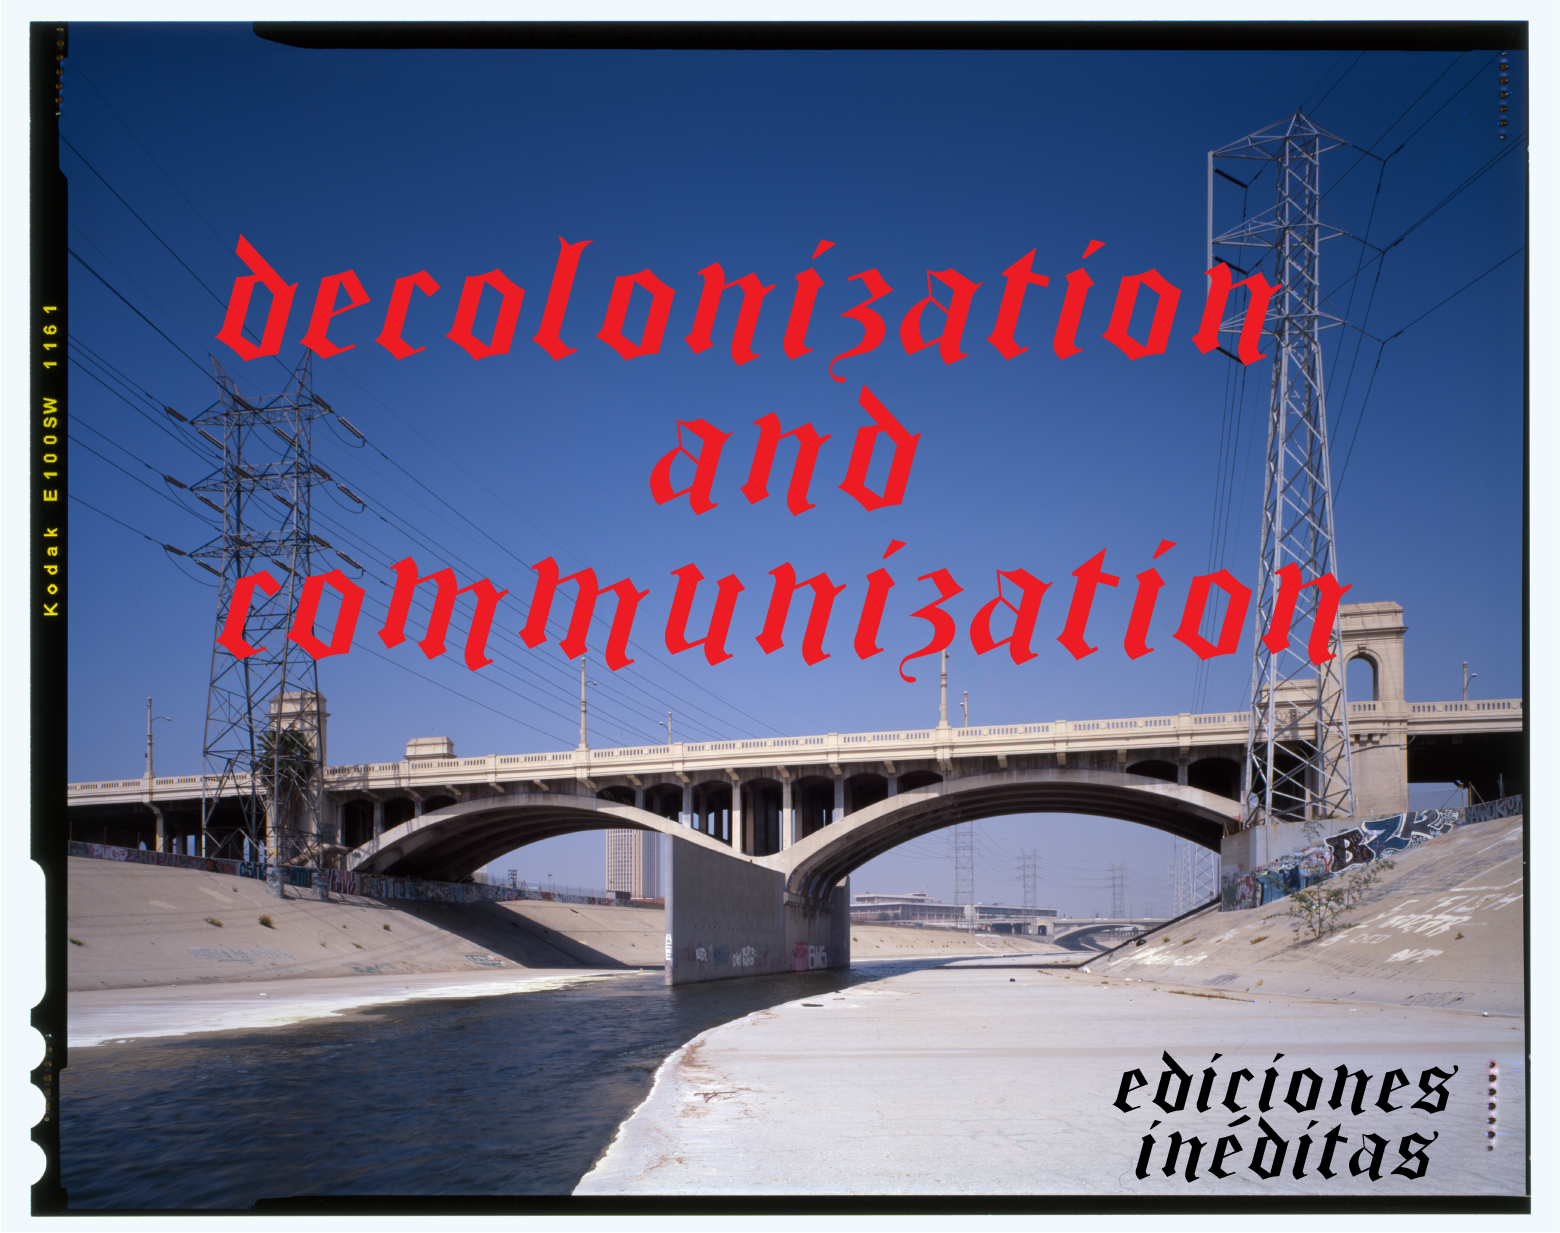 a color film photograph of the previous 6th Street Bridge, seen from the bottom of the channelized Los Angeles River. Water flows down the middle. Power lines and their towers stand before the bridge. In red Old English text reads, "decolonization and communization." At the bottom right-hand side reads "ediciones ineditas" in black Old English text.